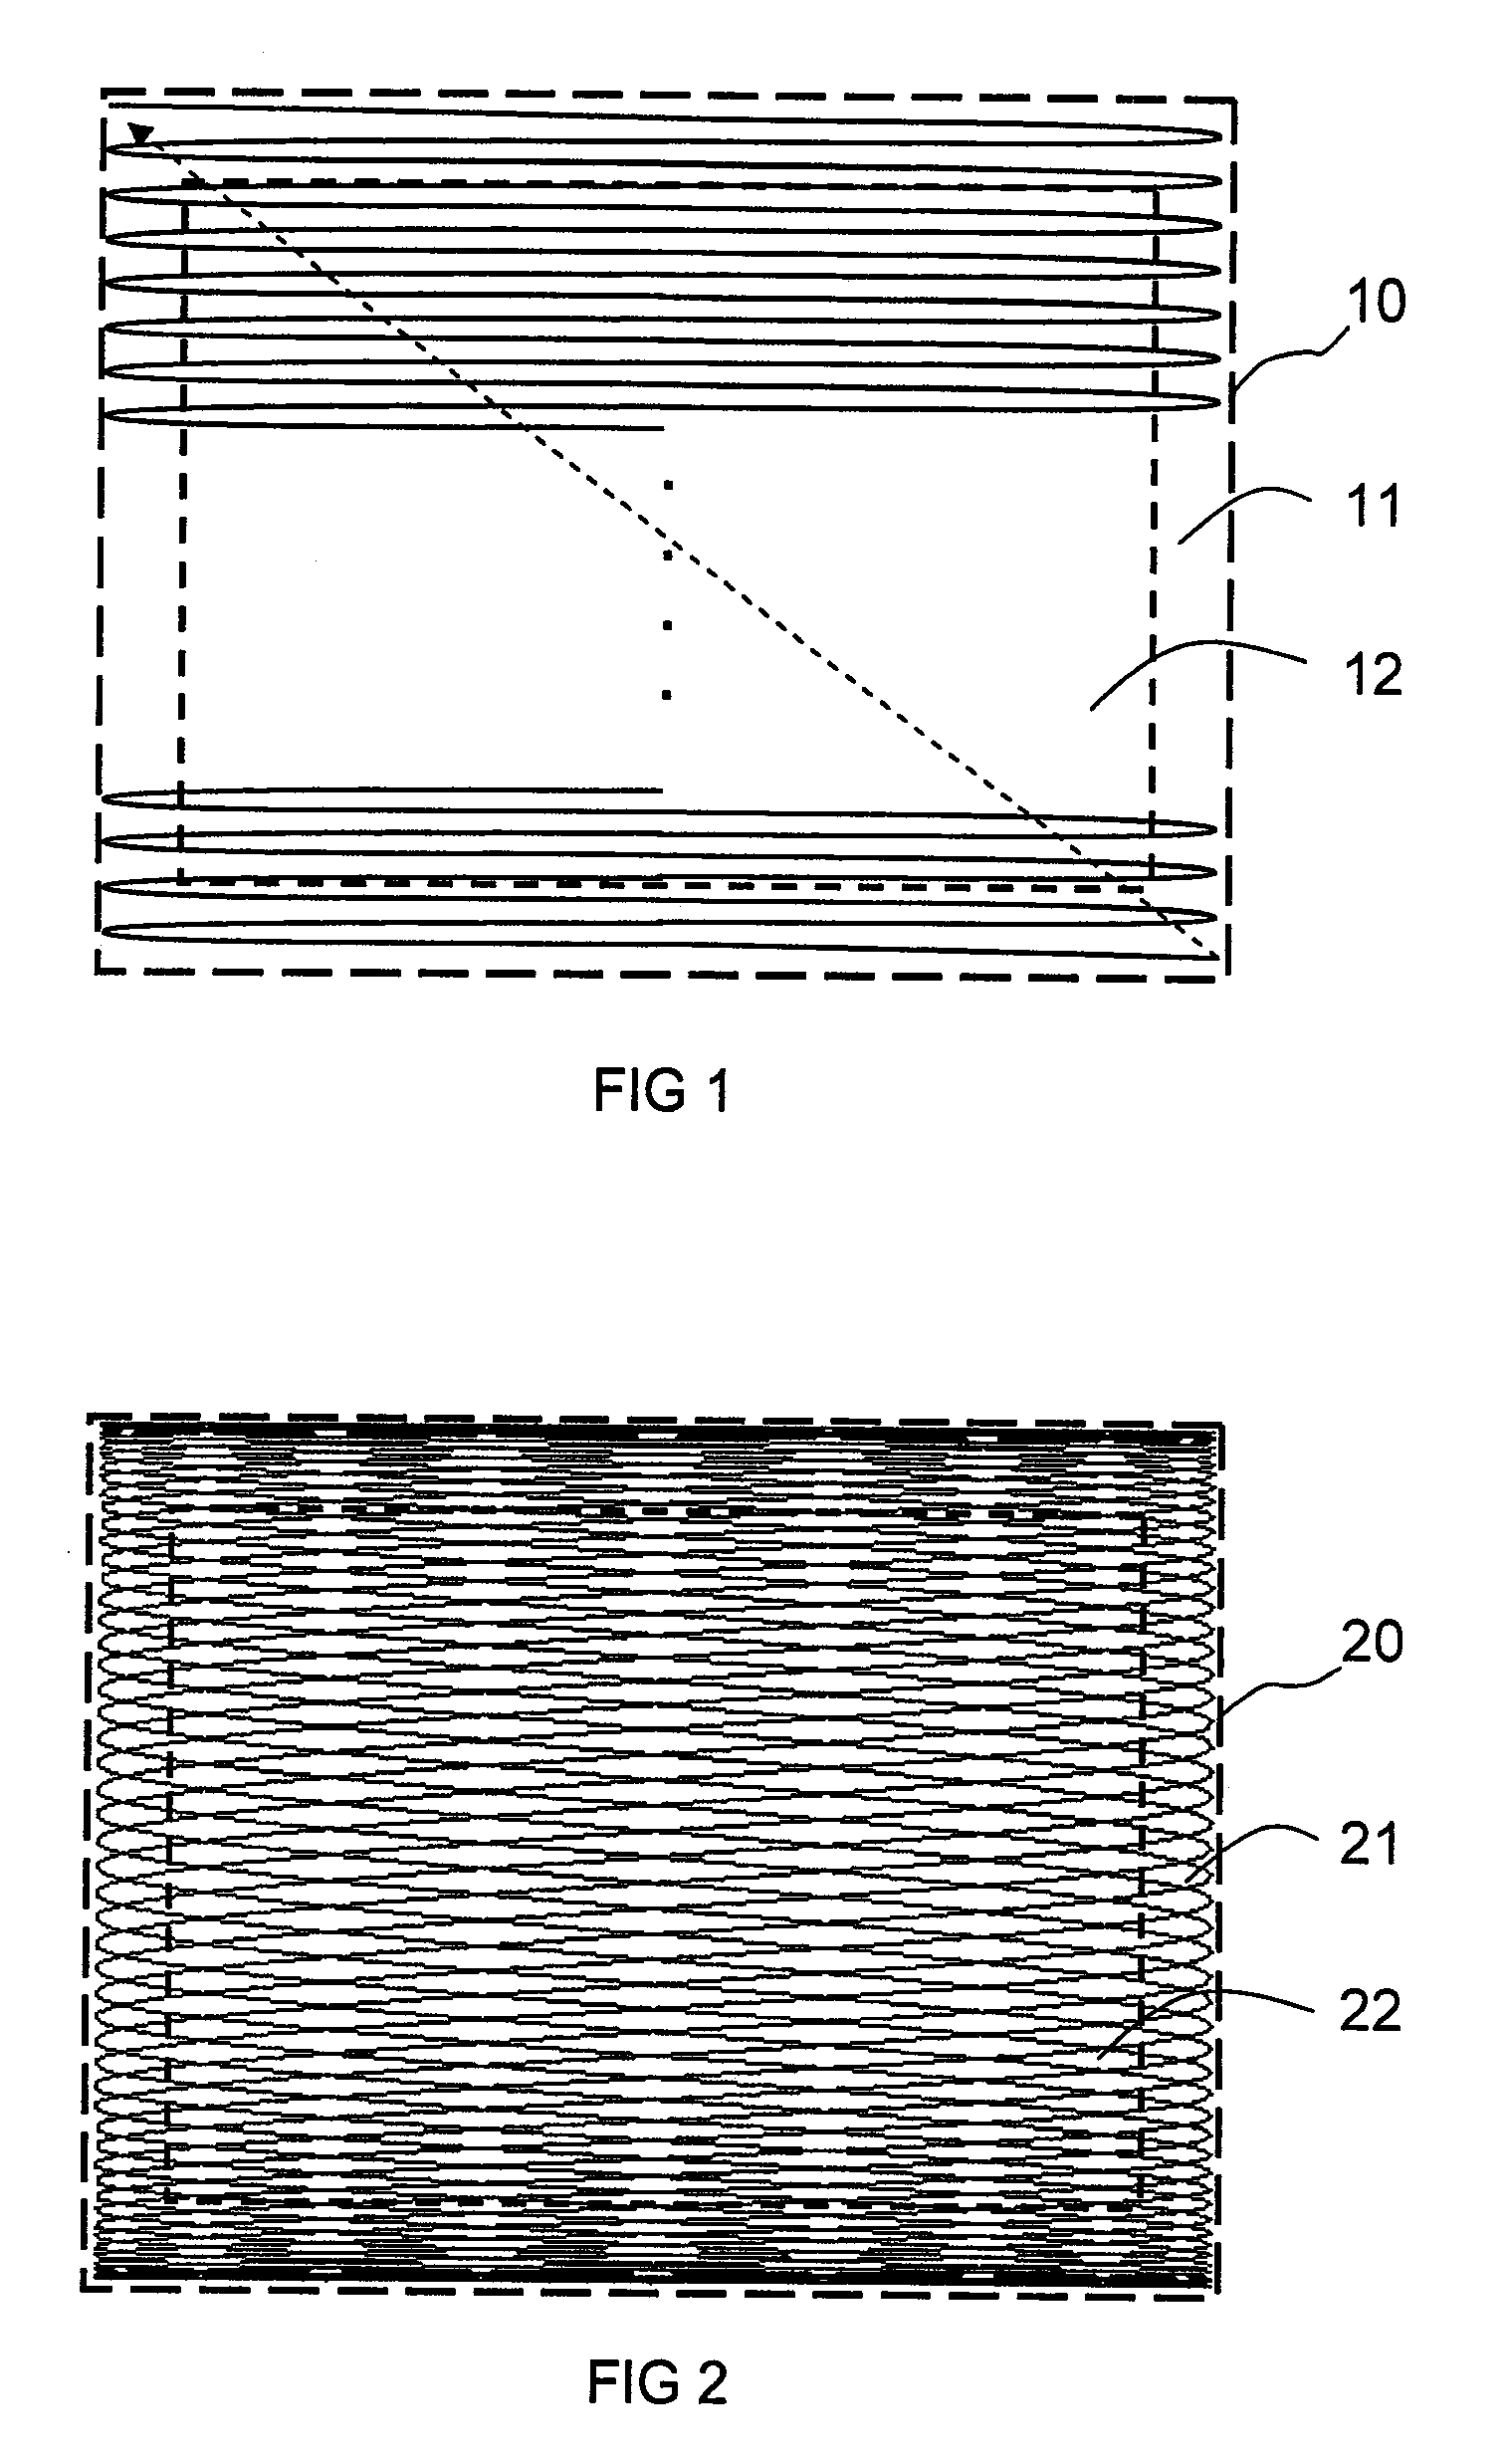 Scanning projection apparatus with phase detection and compensation